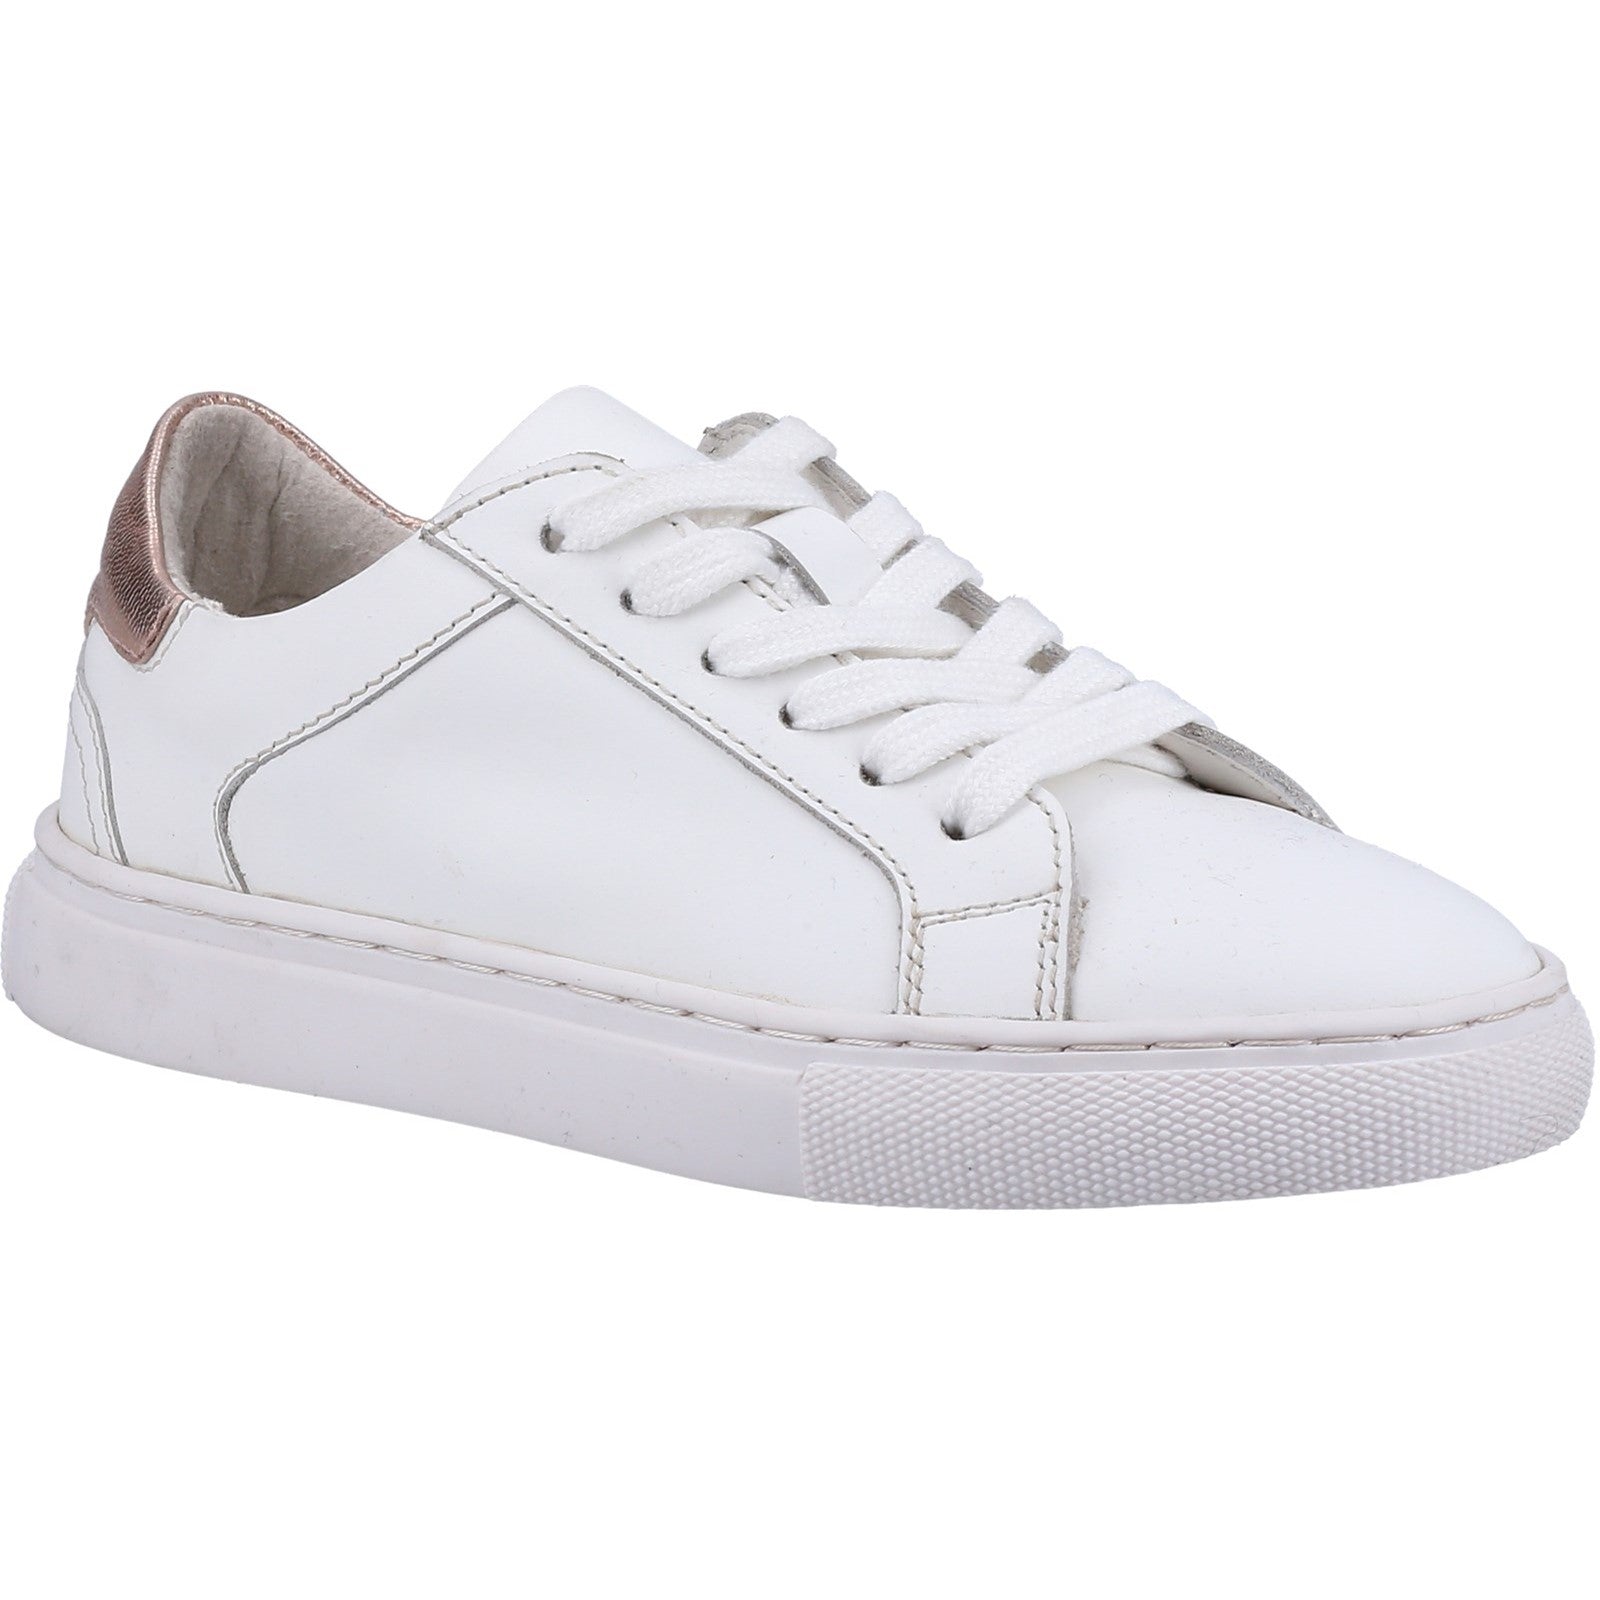 Hush Puppies Girls Camille Leather Trainers - White